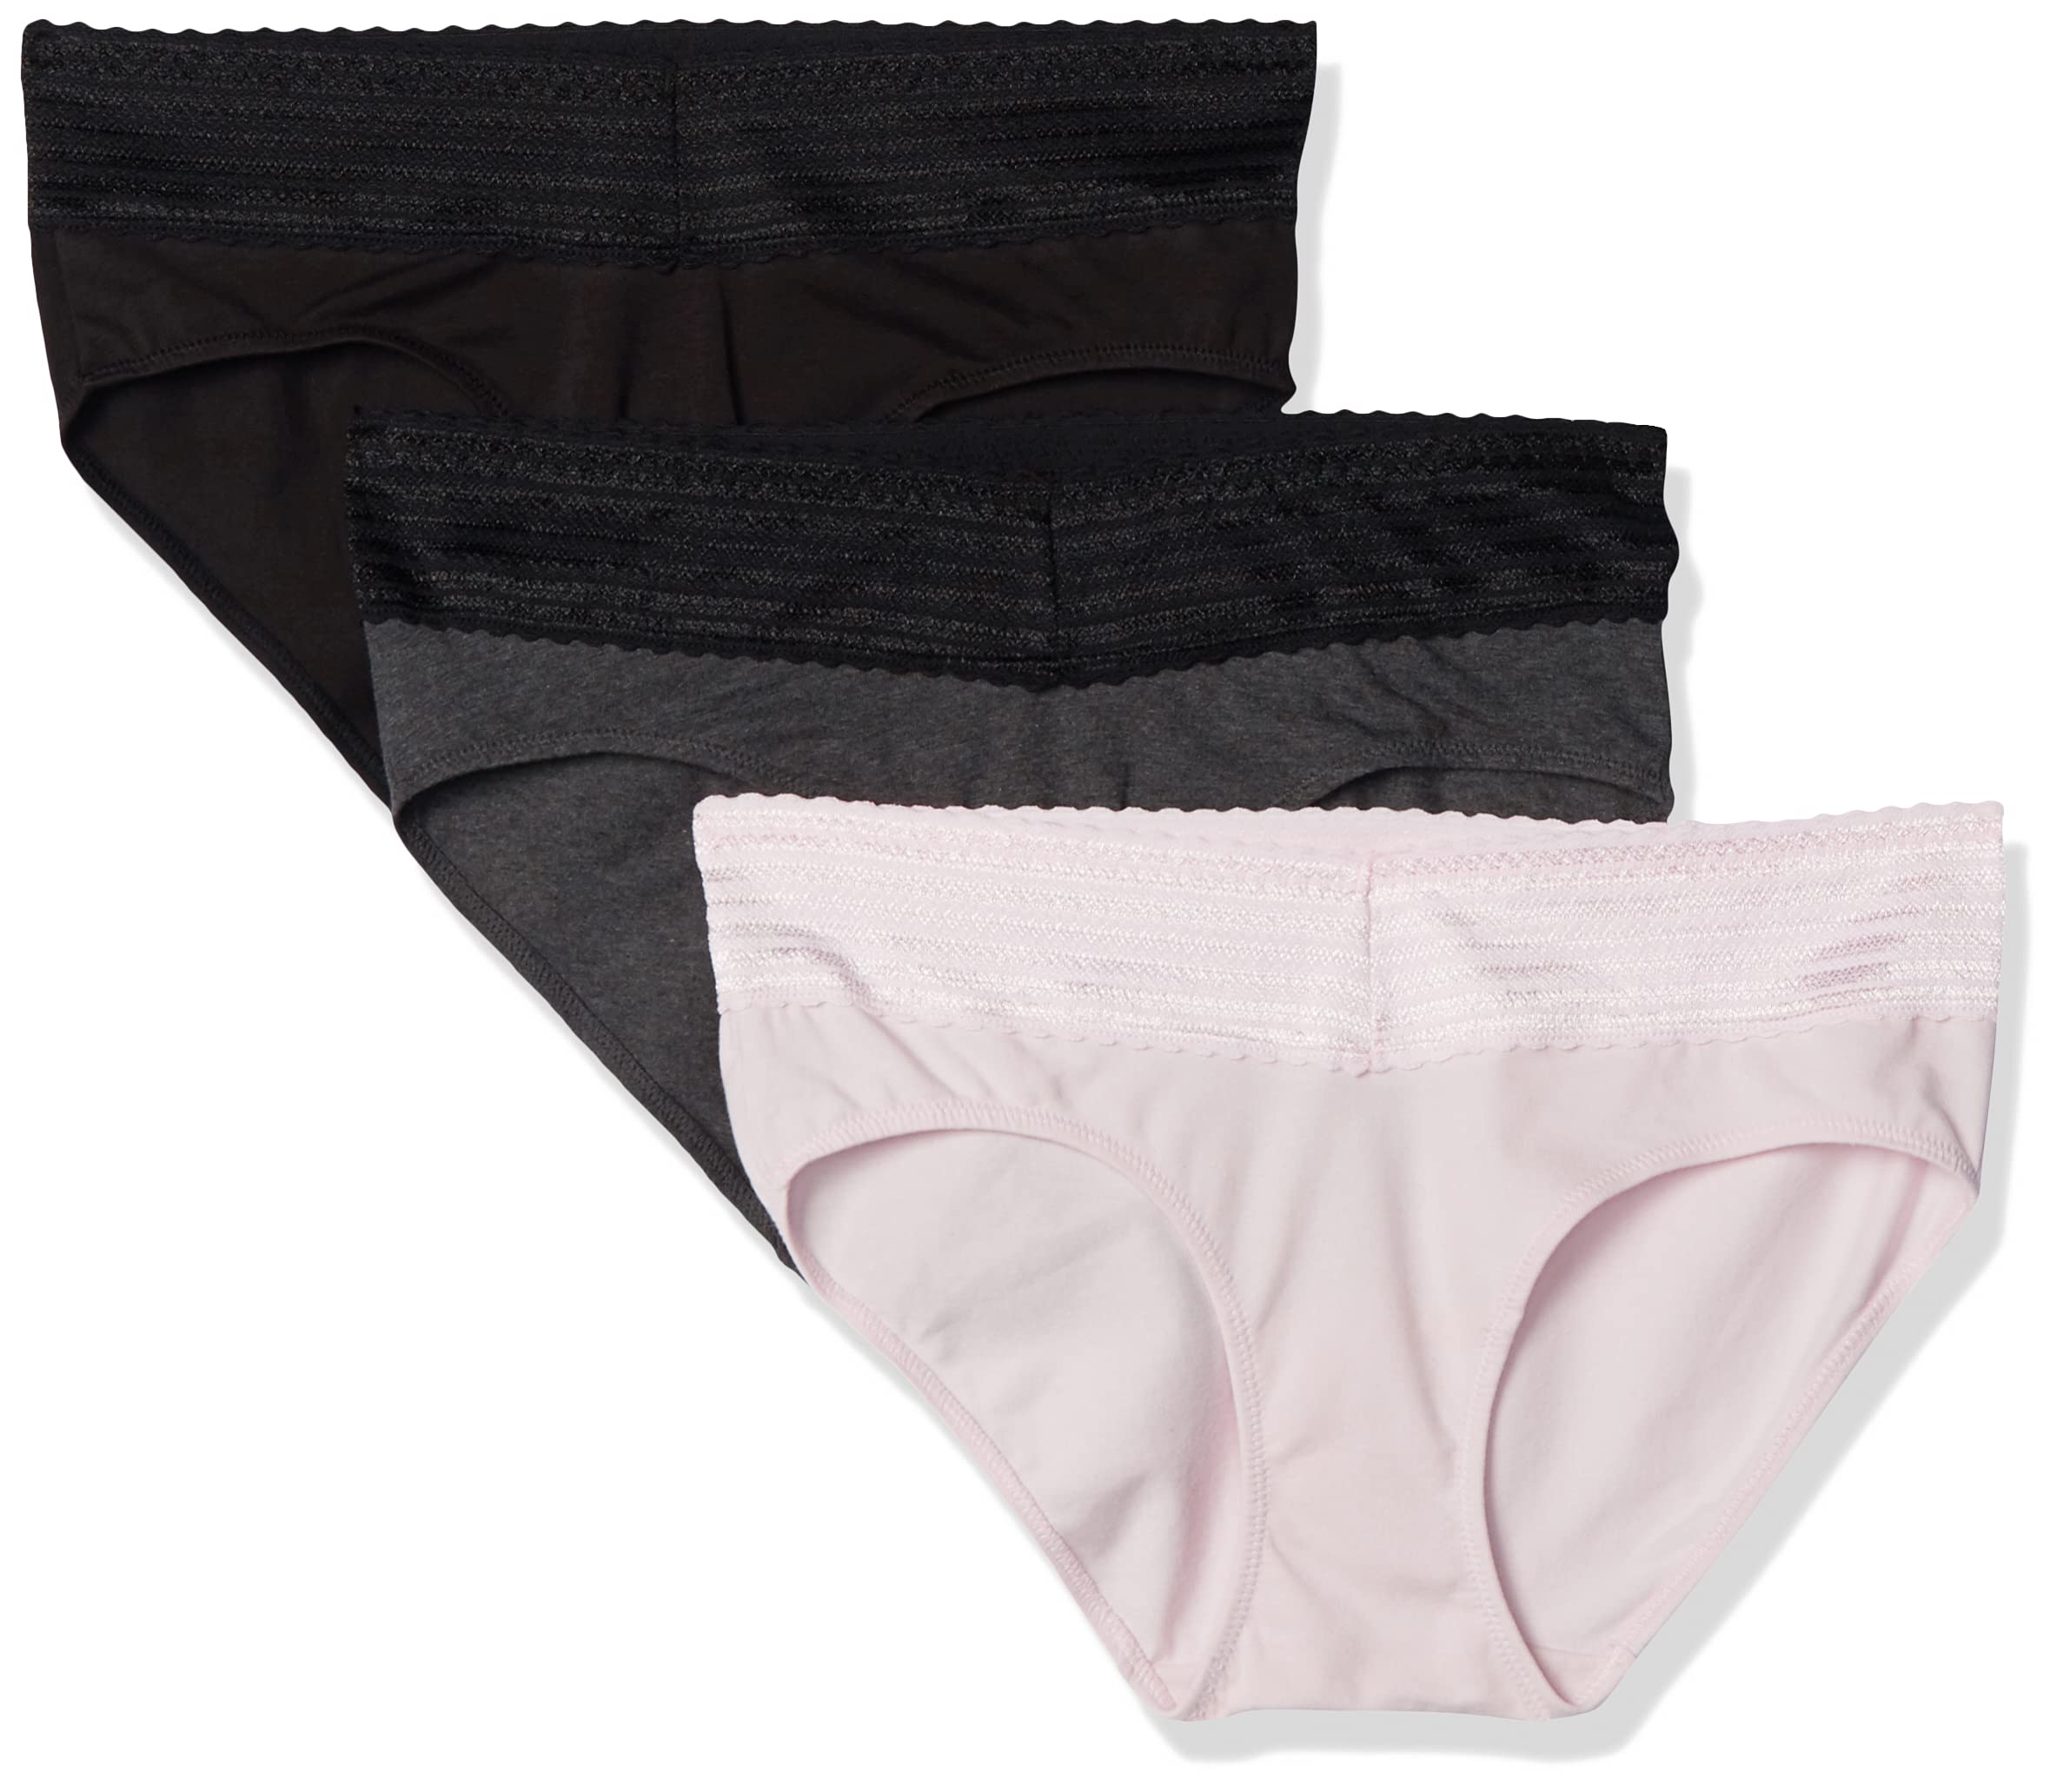 Warner's womens Blissful Benefits No Muffin 3 Pack Hipster Panties, Black/Pale Pink/Dark Gray Heather, Small US